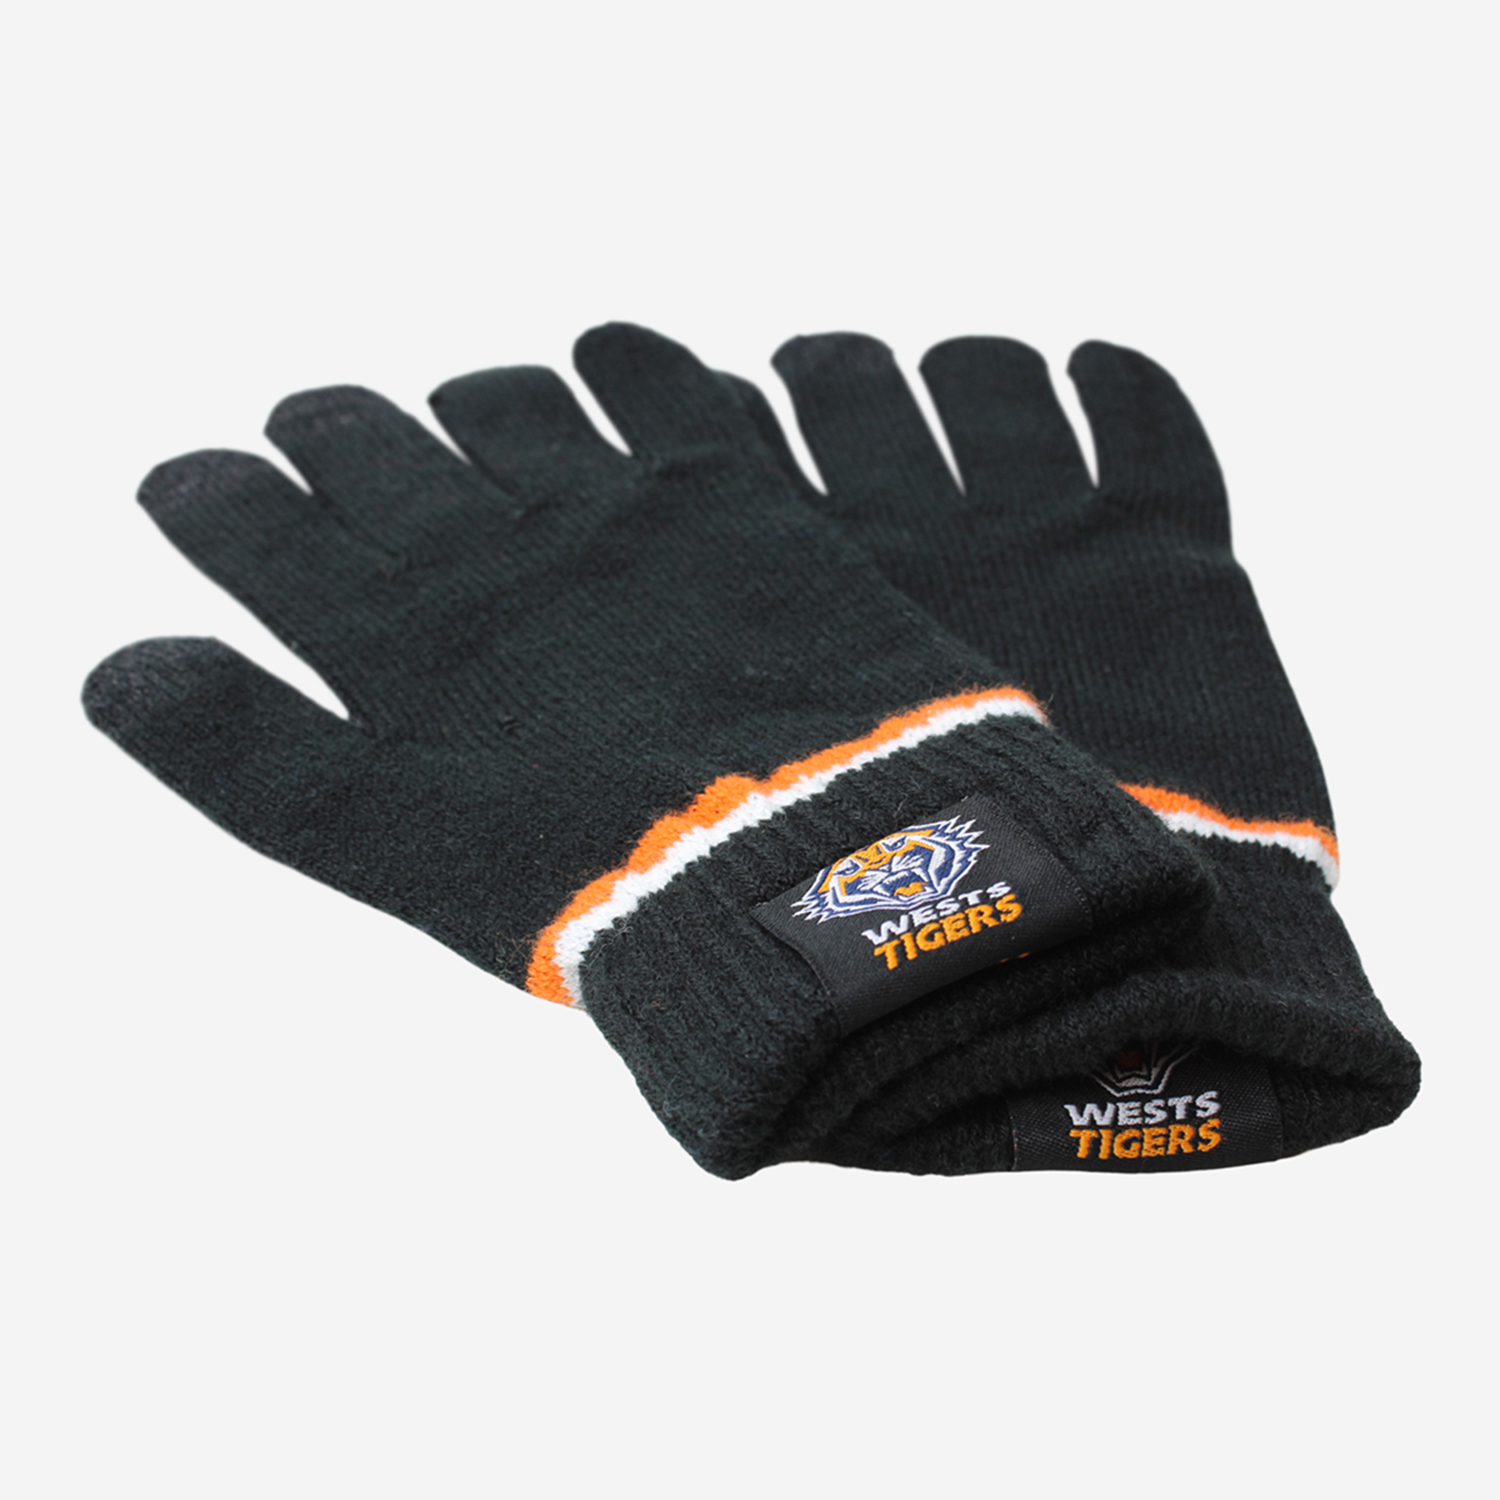 WESTS TIGERS NRL TOUCHSCREEN GLOVES